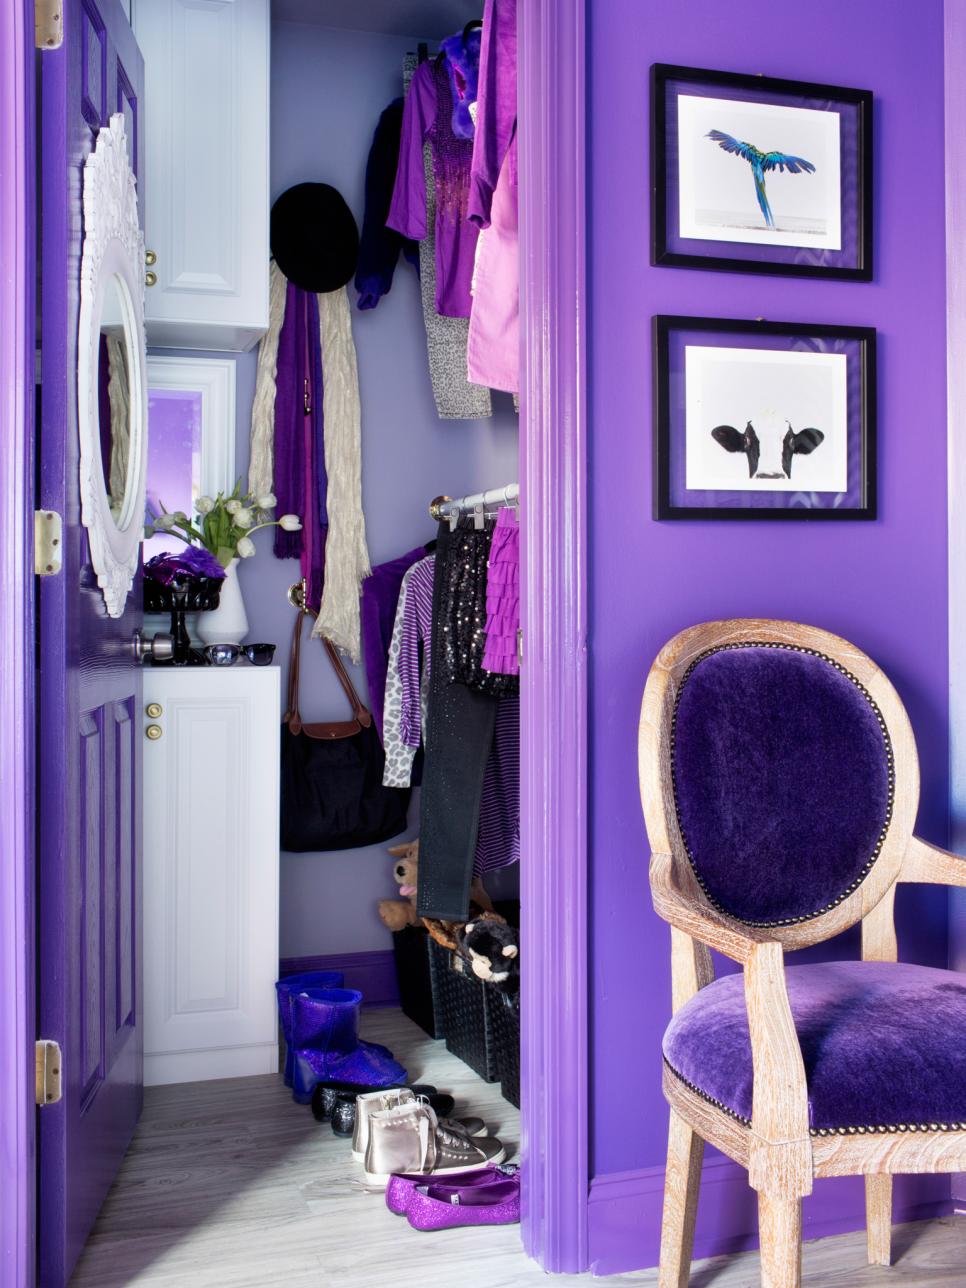 Closet Case: A One-Day Glamorous Makeover